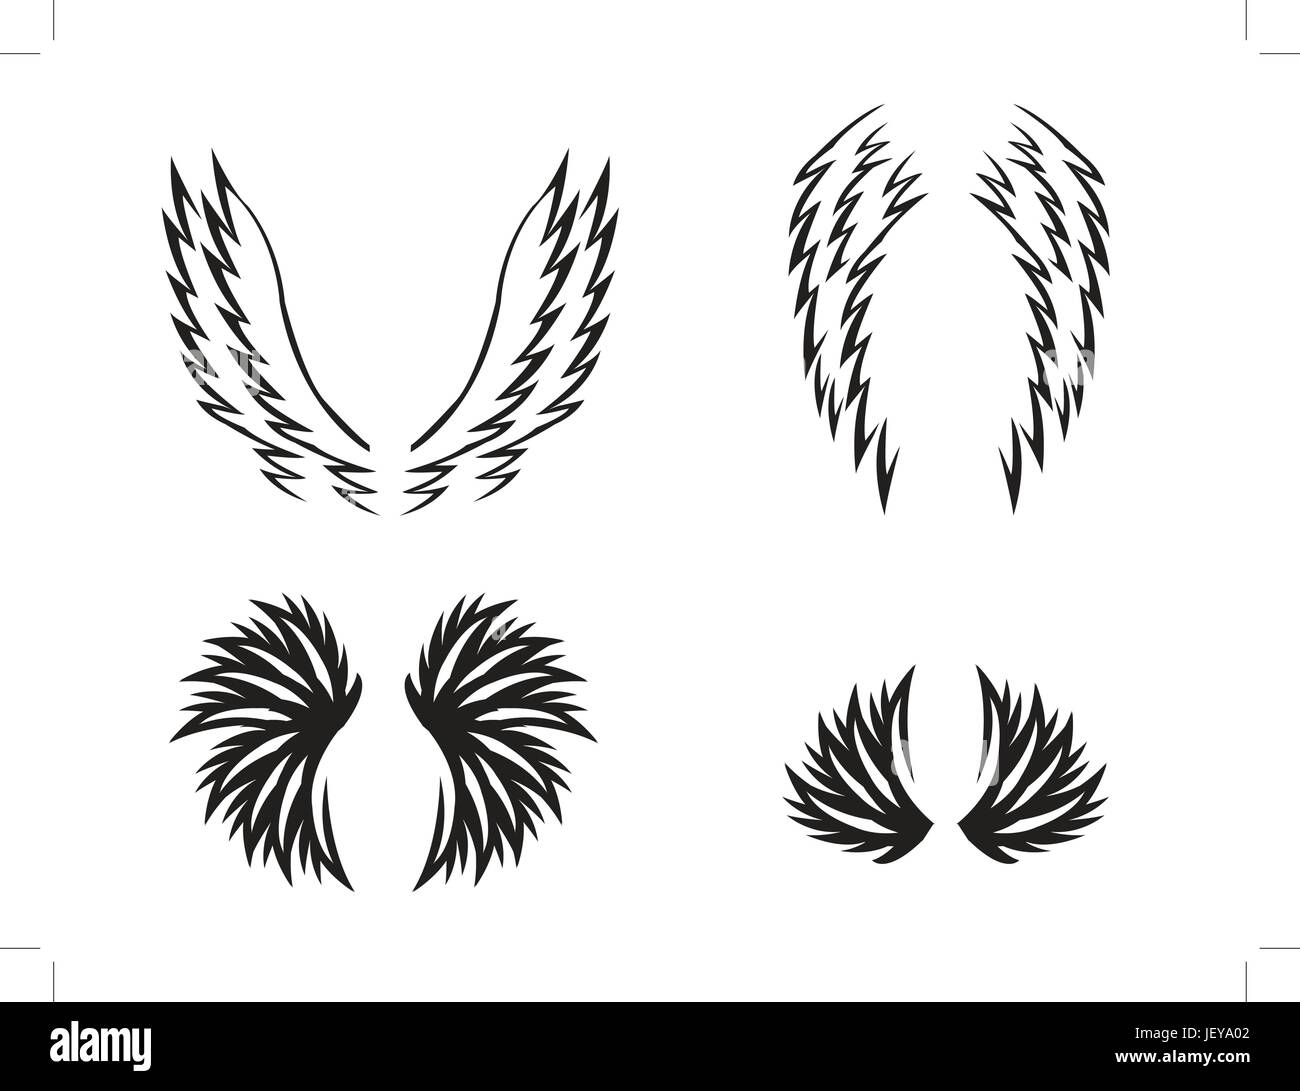 objects, isolated, flight, animal, bird, wing, lines, ornament, illustration, Stock Vector